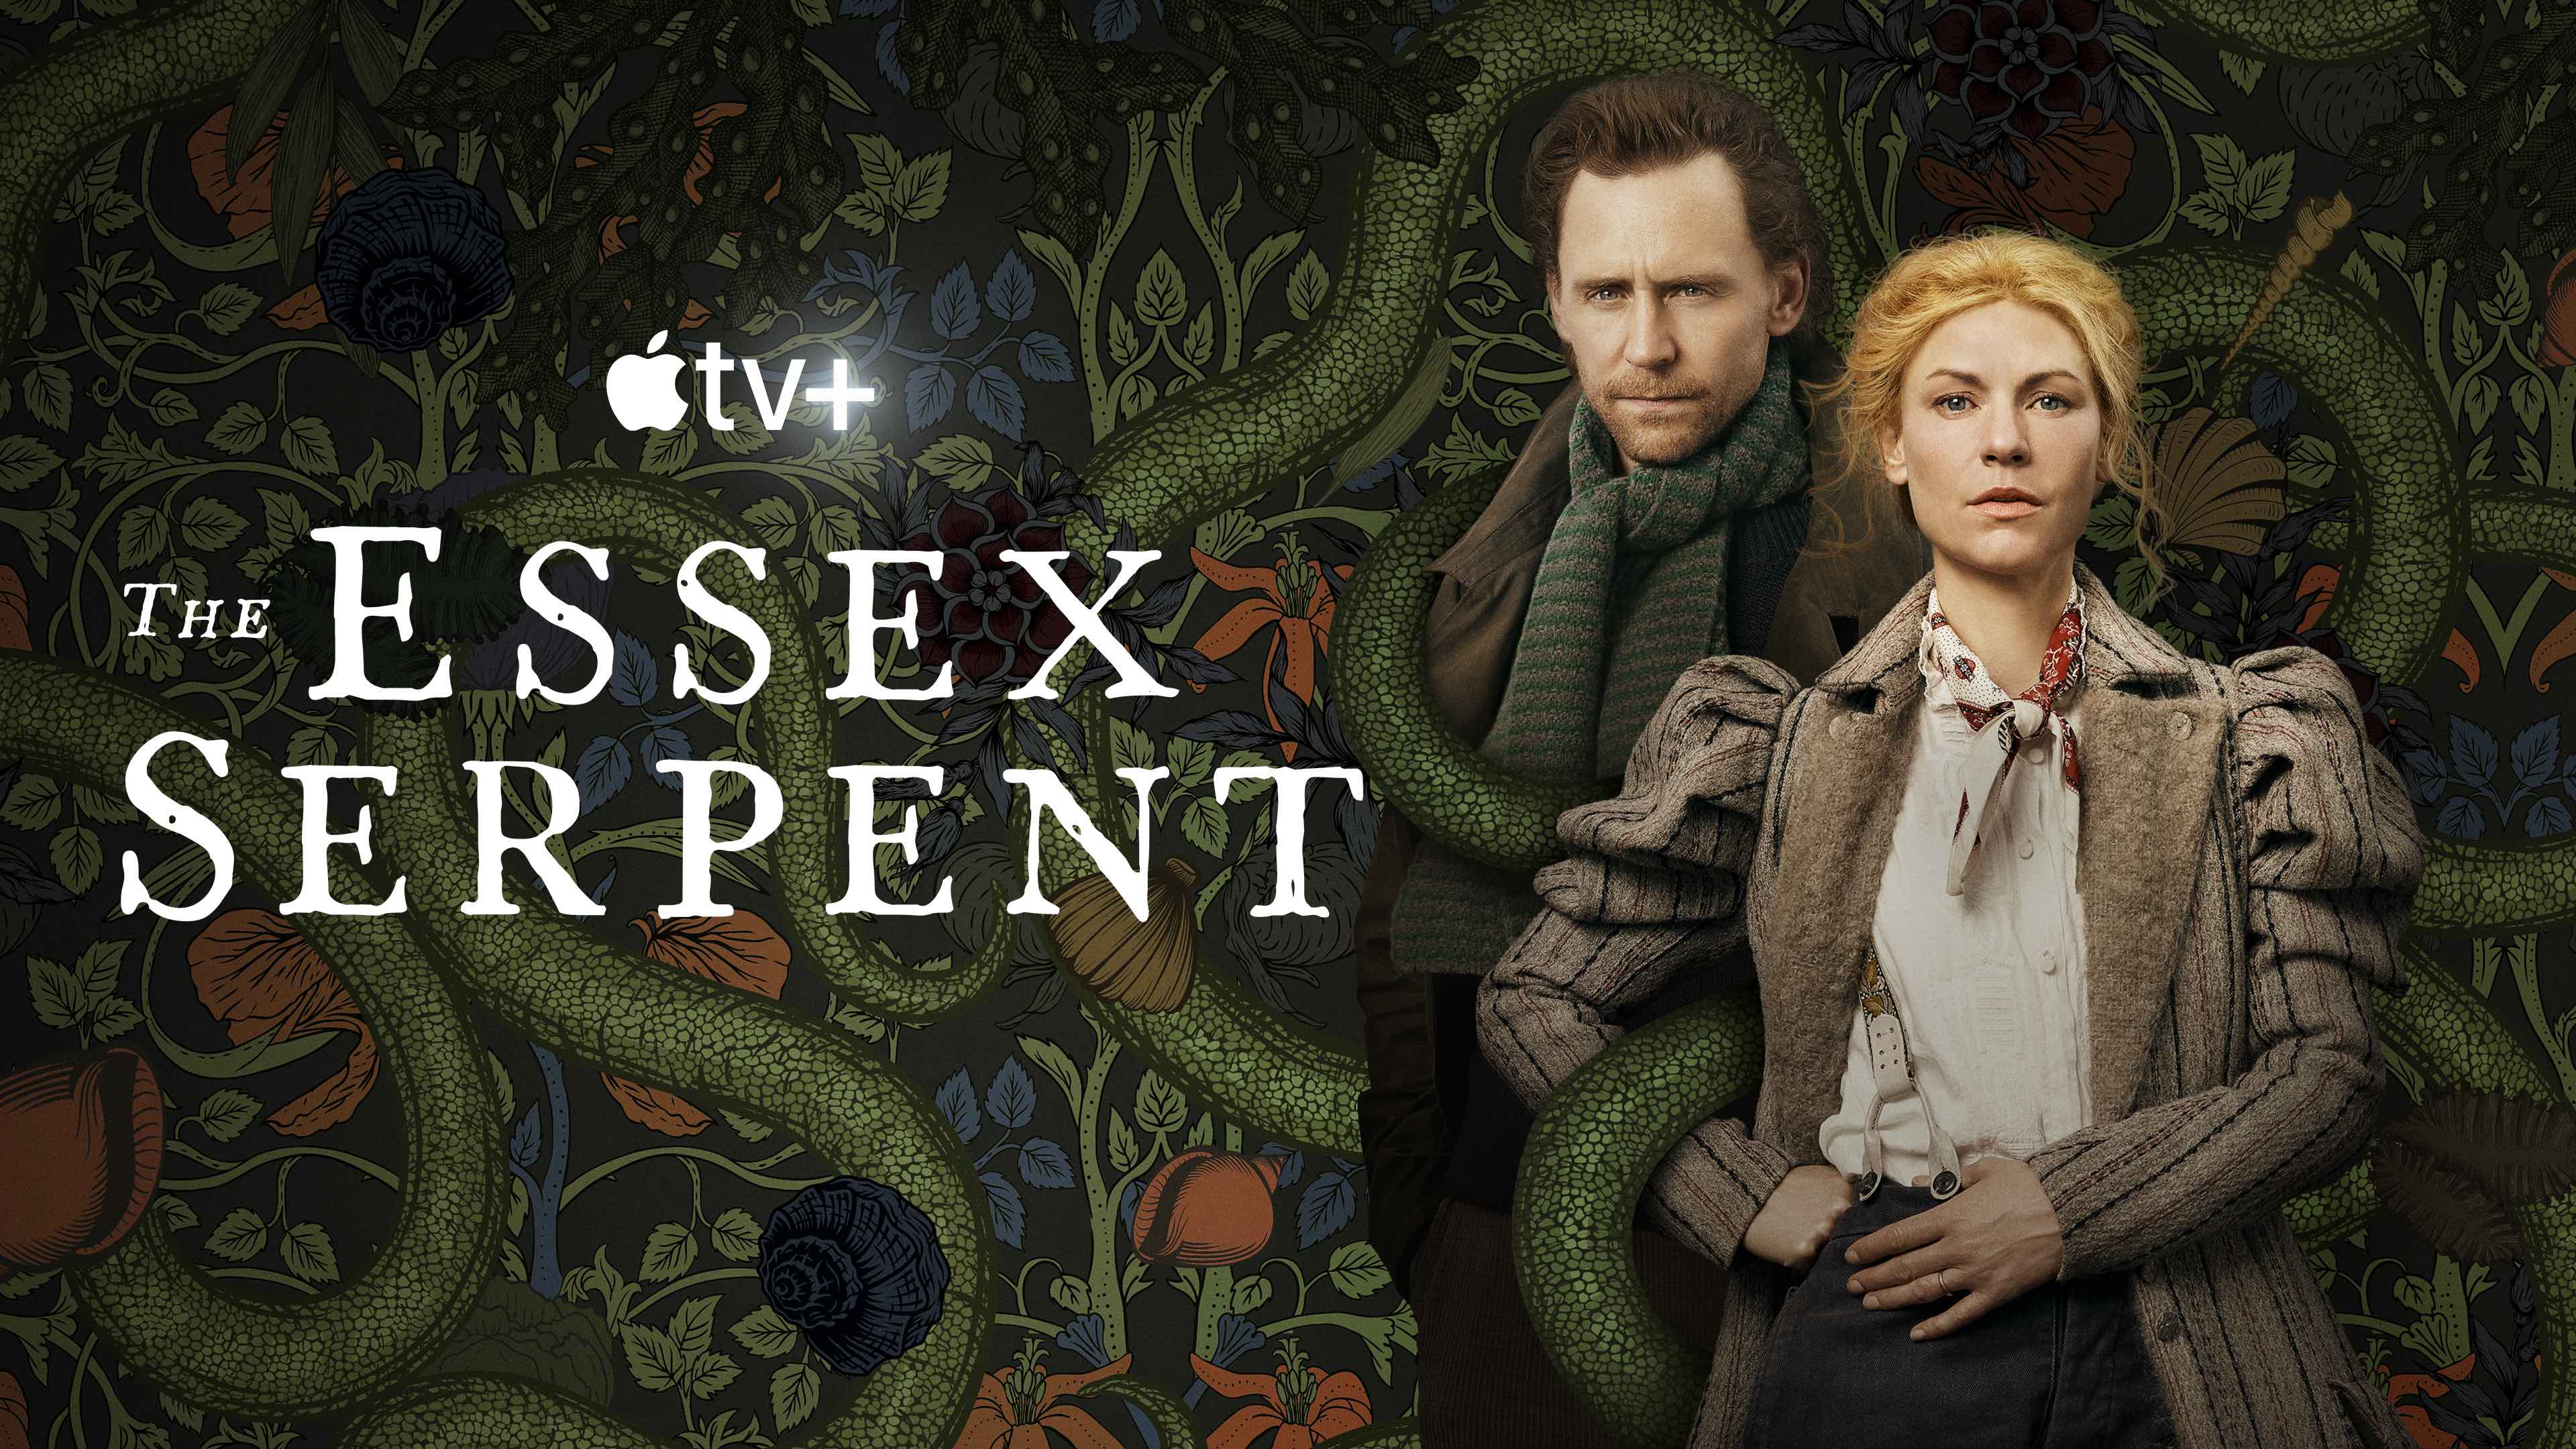 The Essex Serpent Soundtrack - Every Song in the Apple TV+ Series